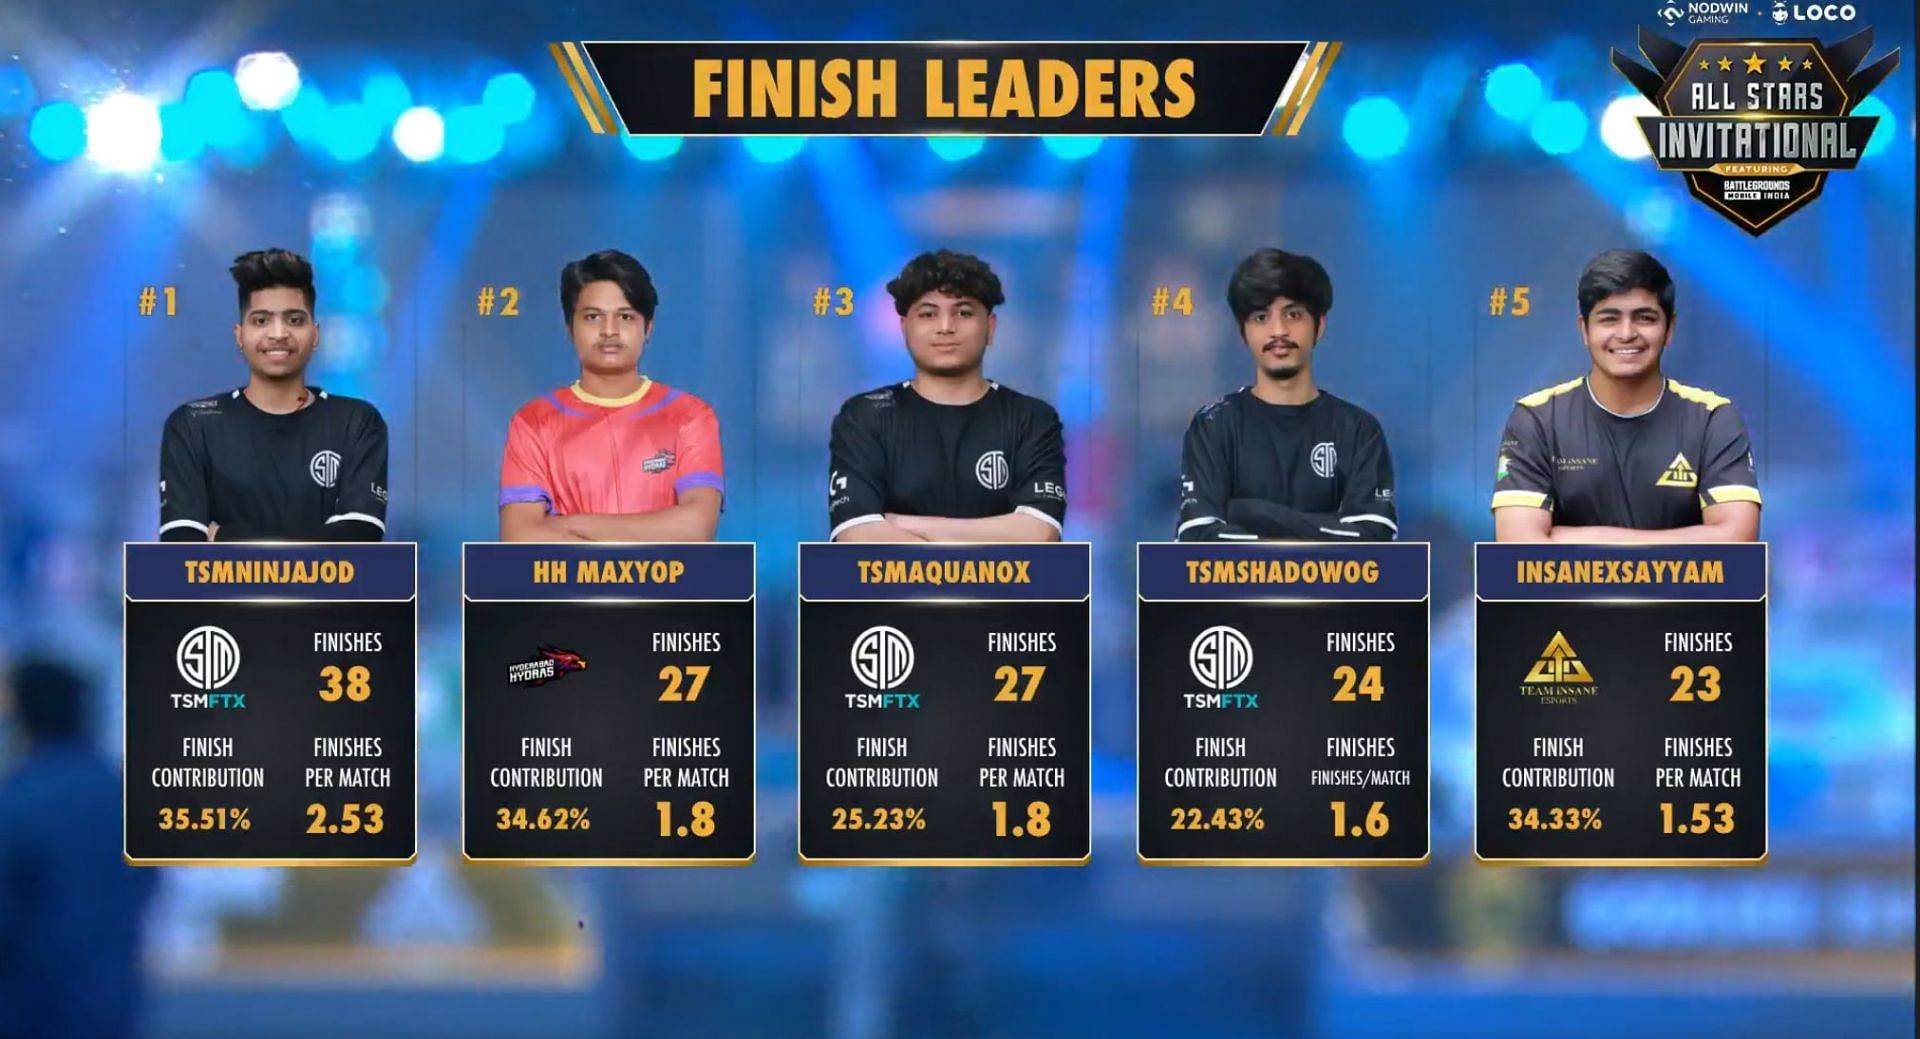 Top 5 players from BGMI All Stars Invitational (Image via Nodwin Gaming)